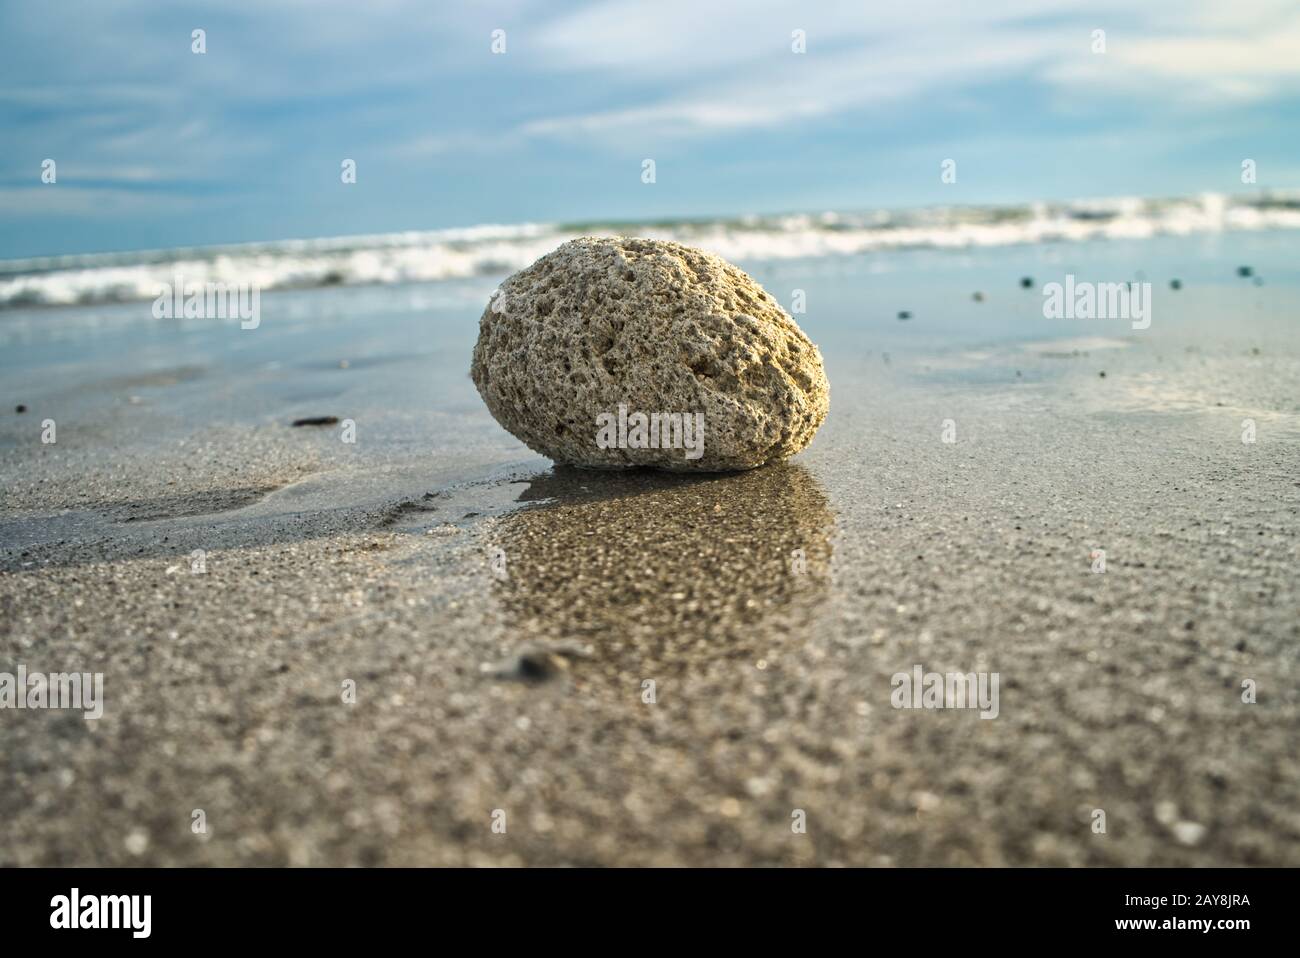 Focus on a stone at the beach with horizon and ocean in background Stock Photo